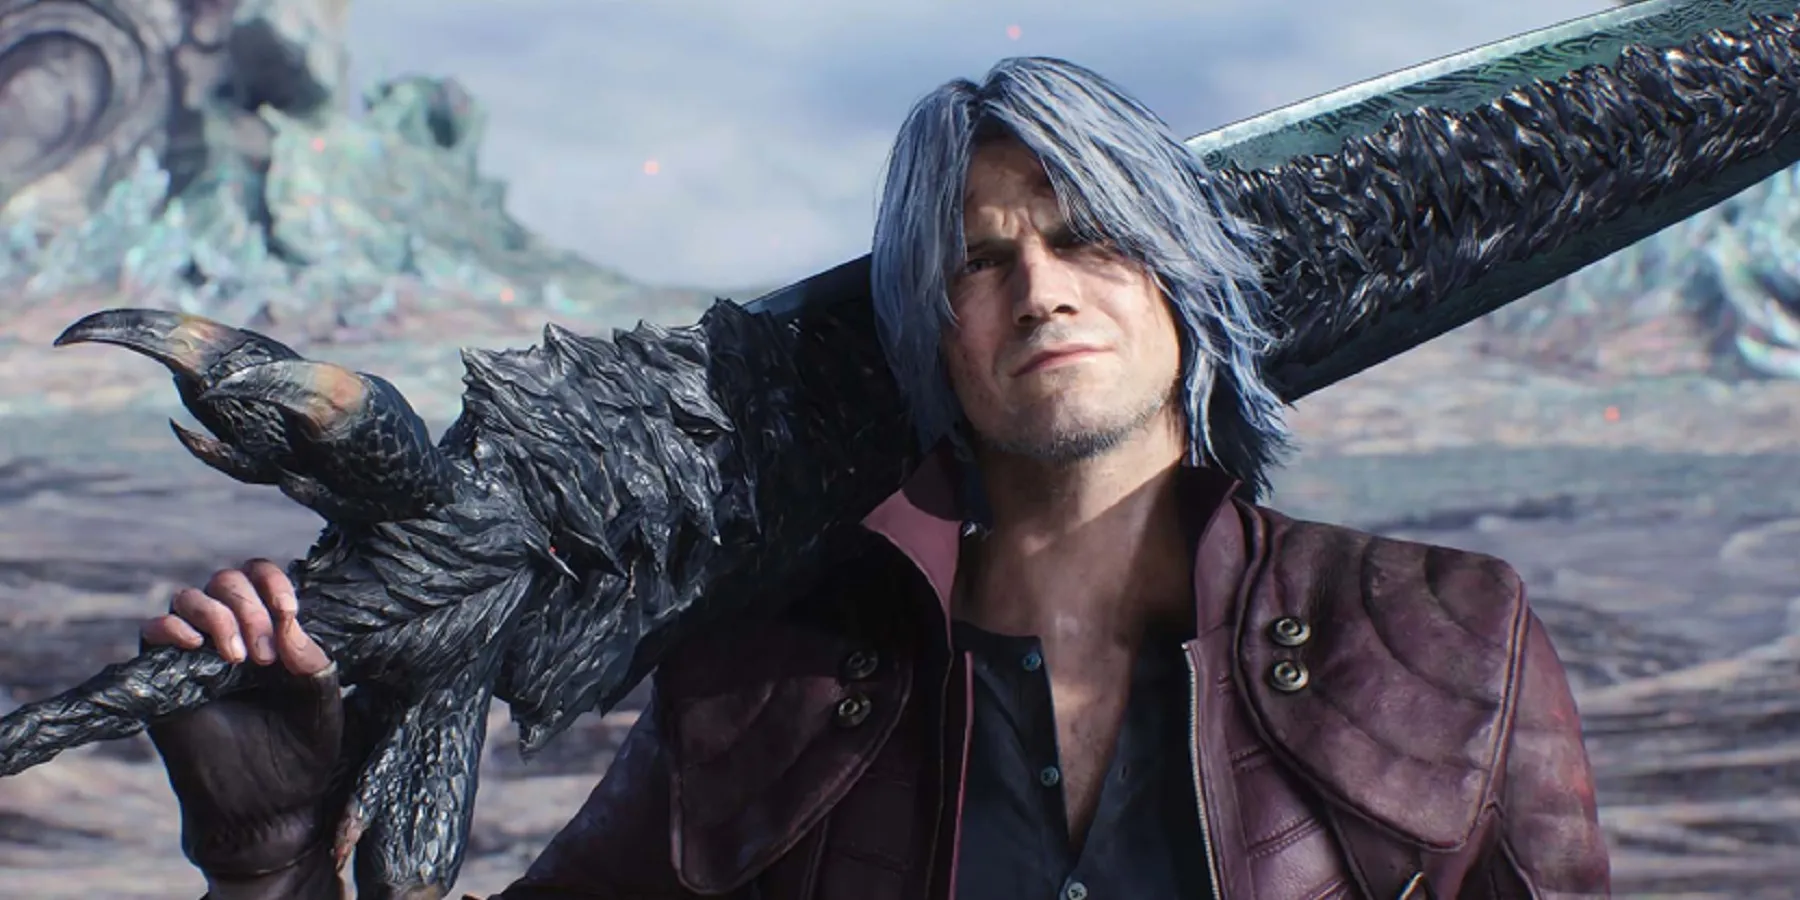 Devil May Cry 5 Dante carries a sword slung over his shoulder while staring at the viewer.